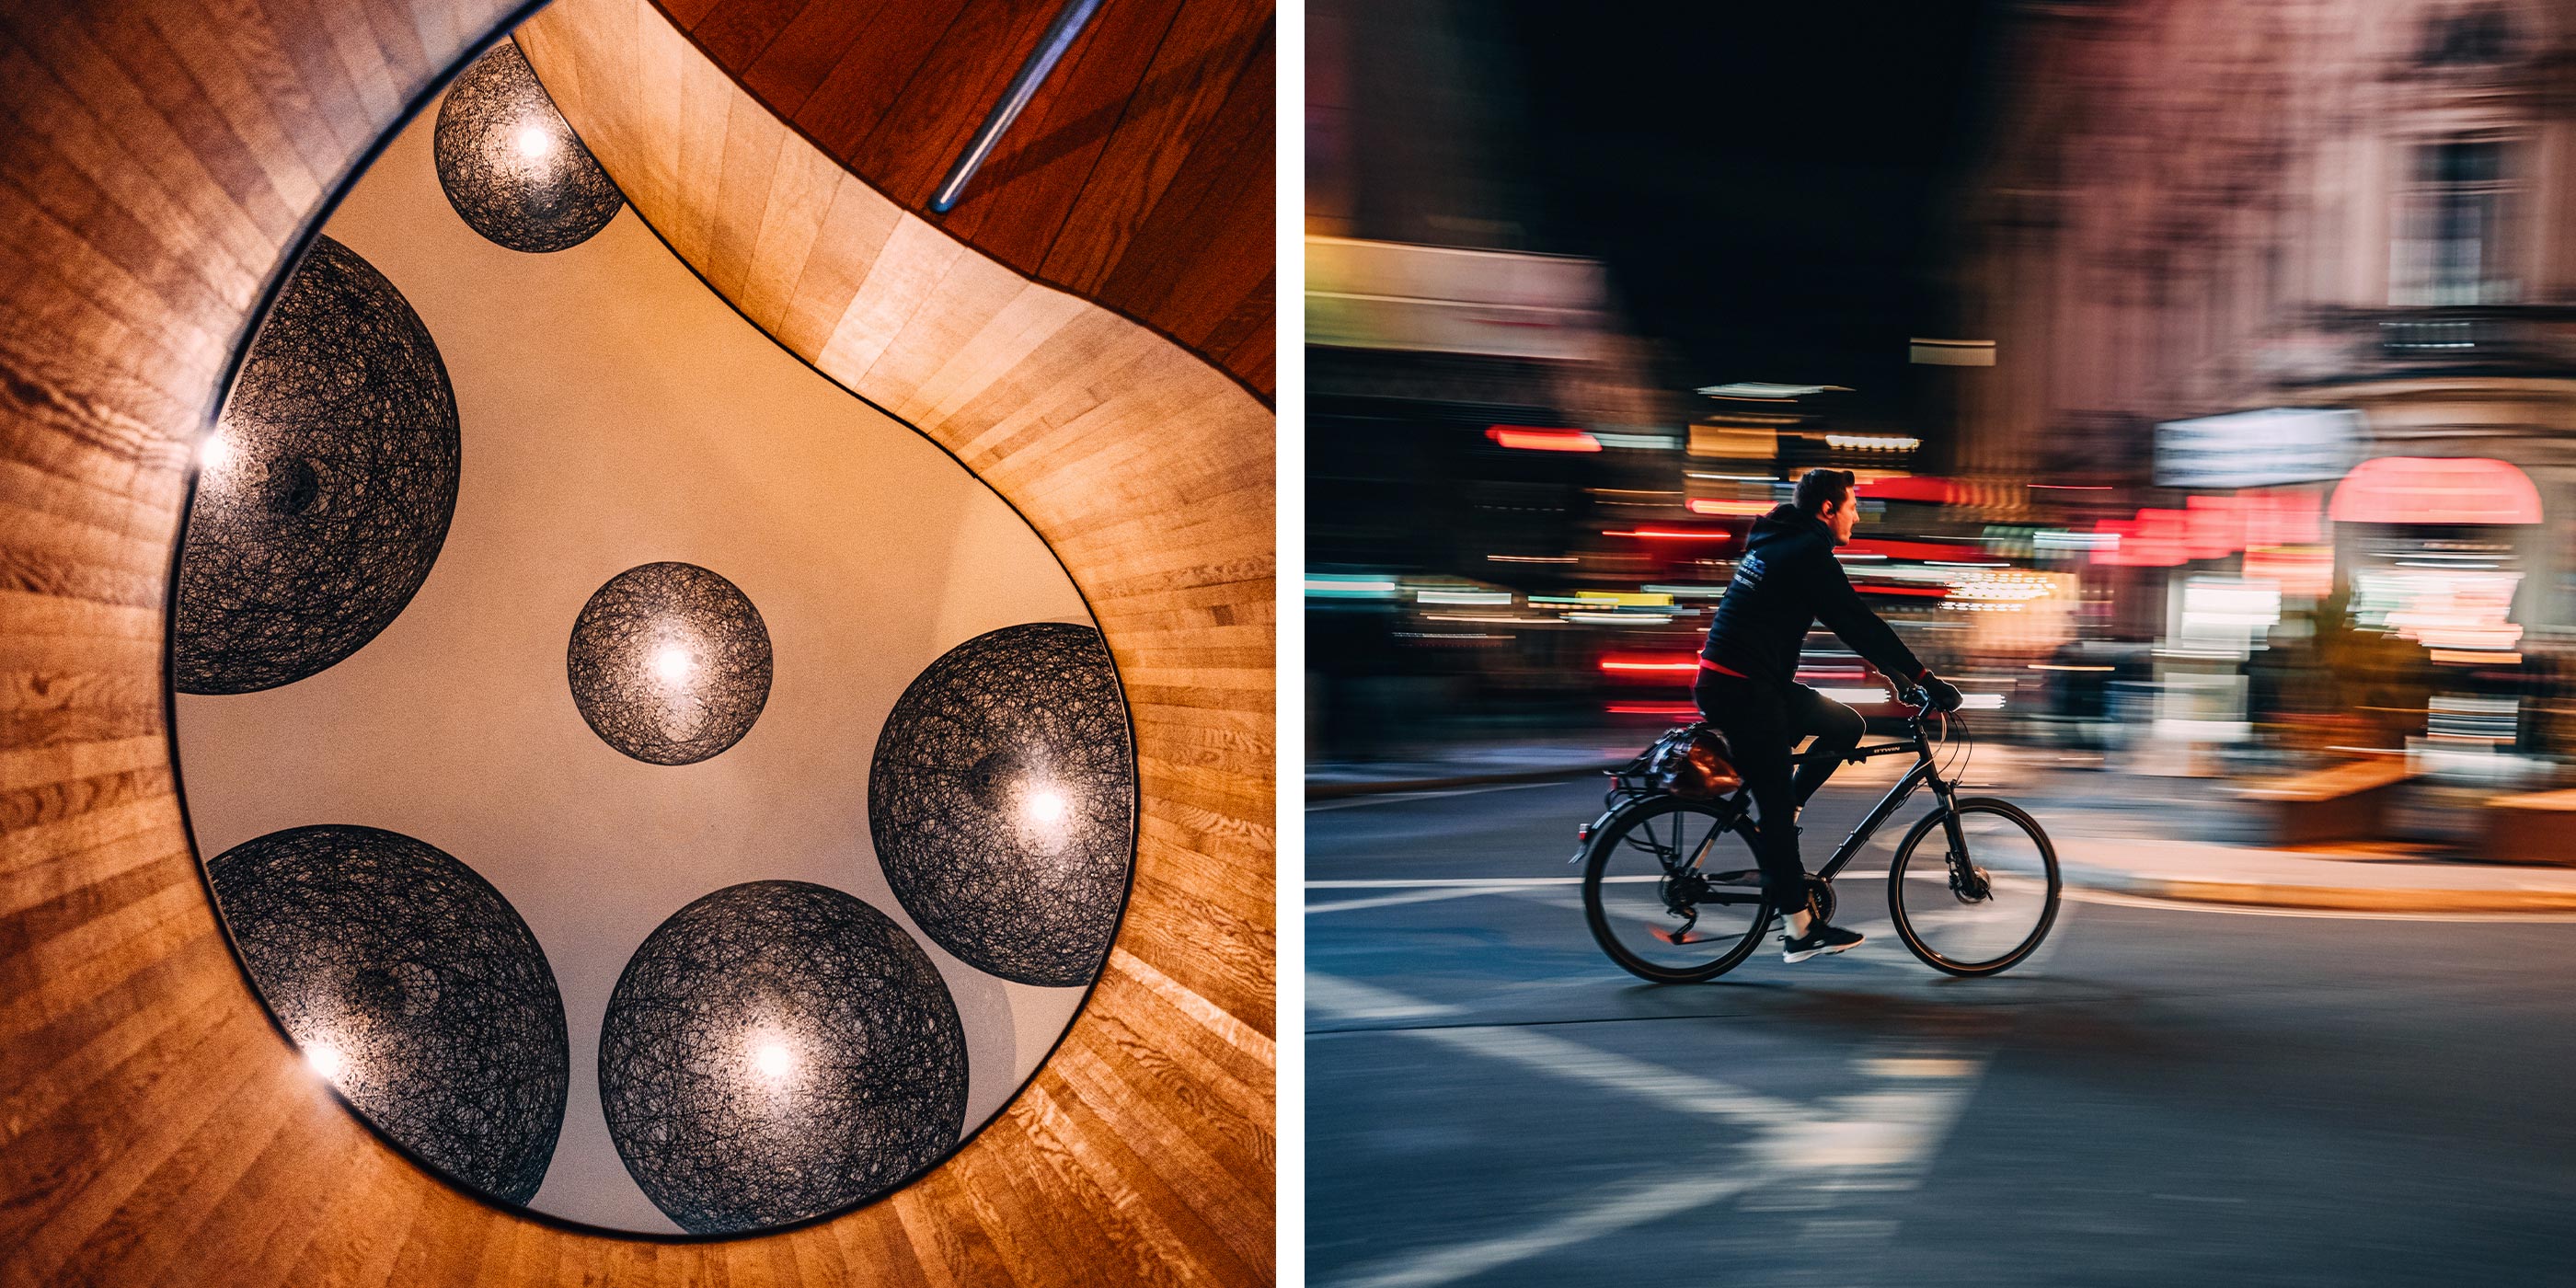 photo of a ceiling looking up from the ground and photo of a person on a bike at night, taken using the NIKKOR Z 26mm f/2.8